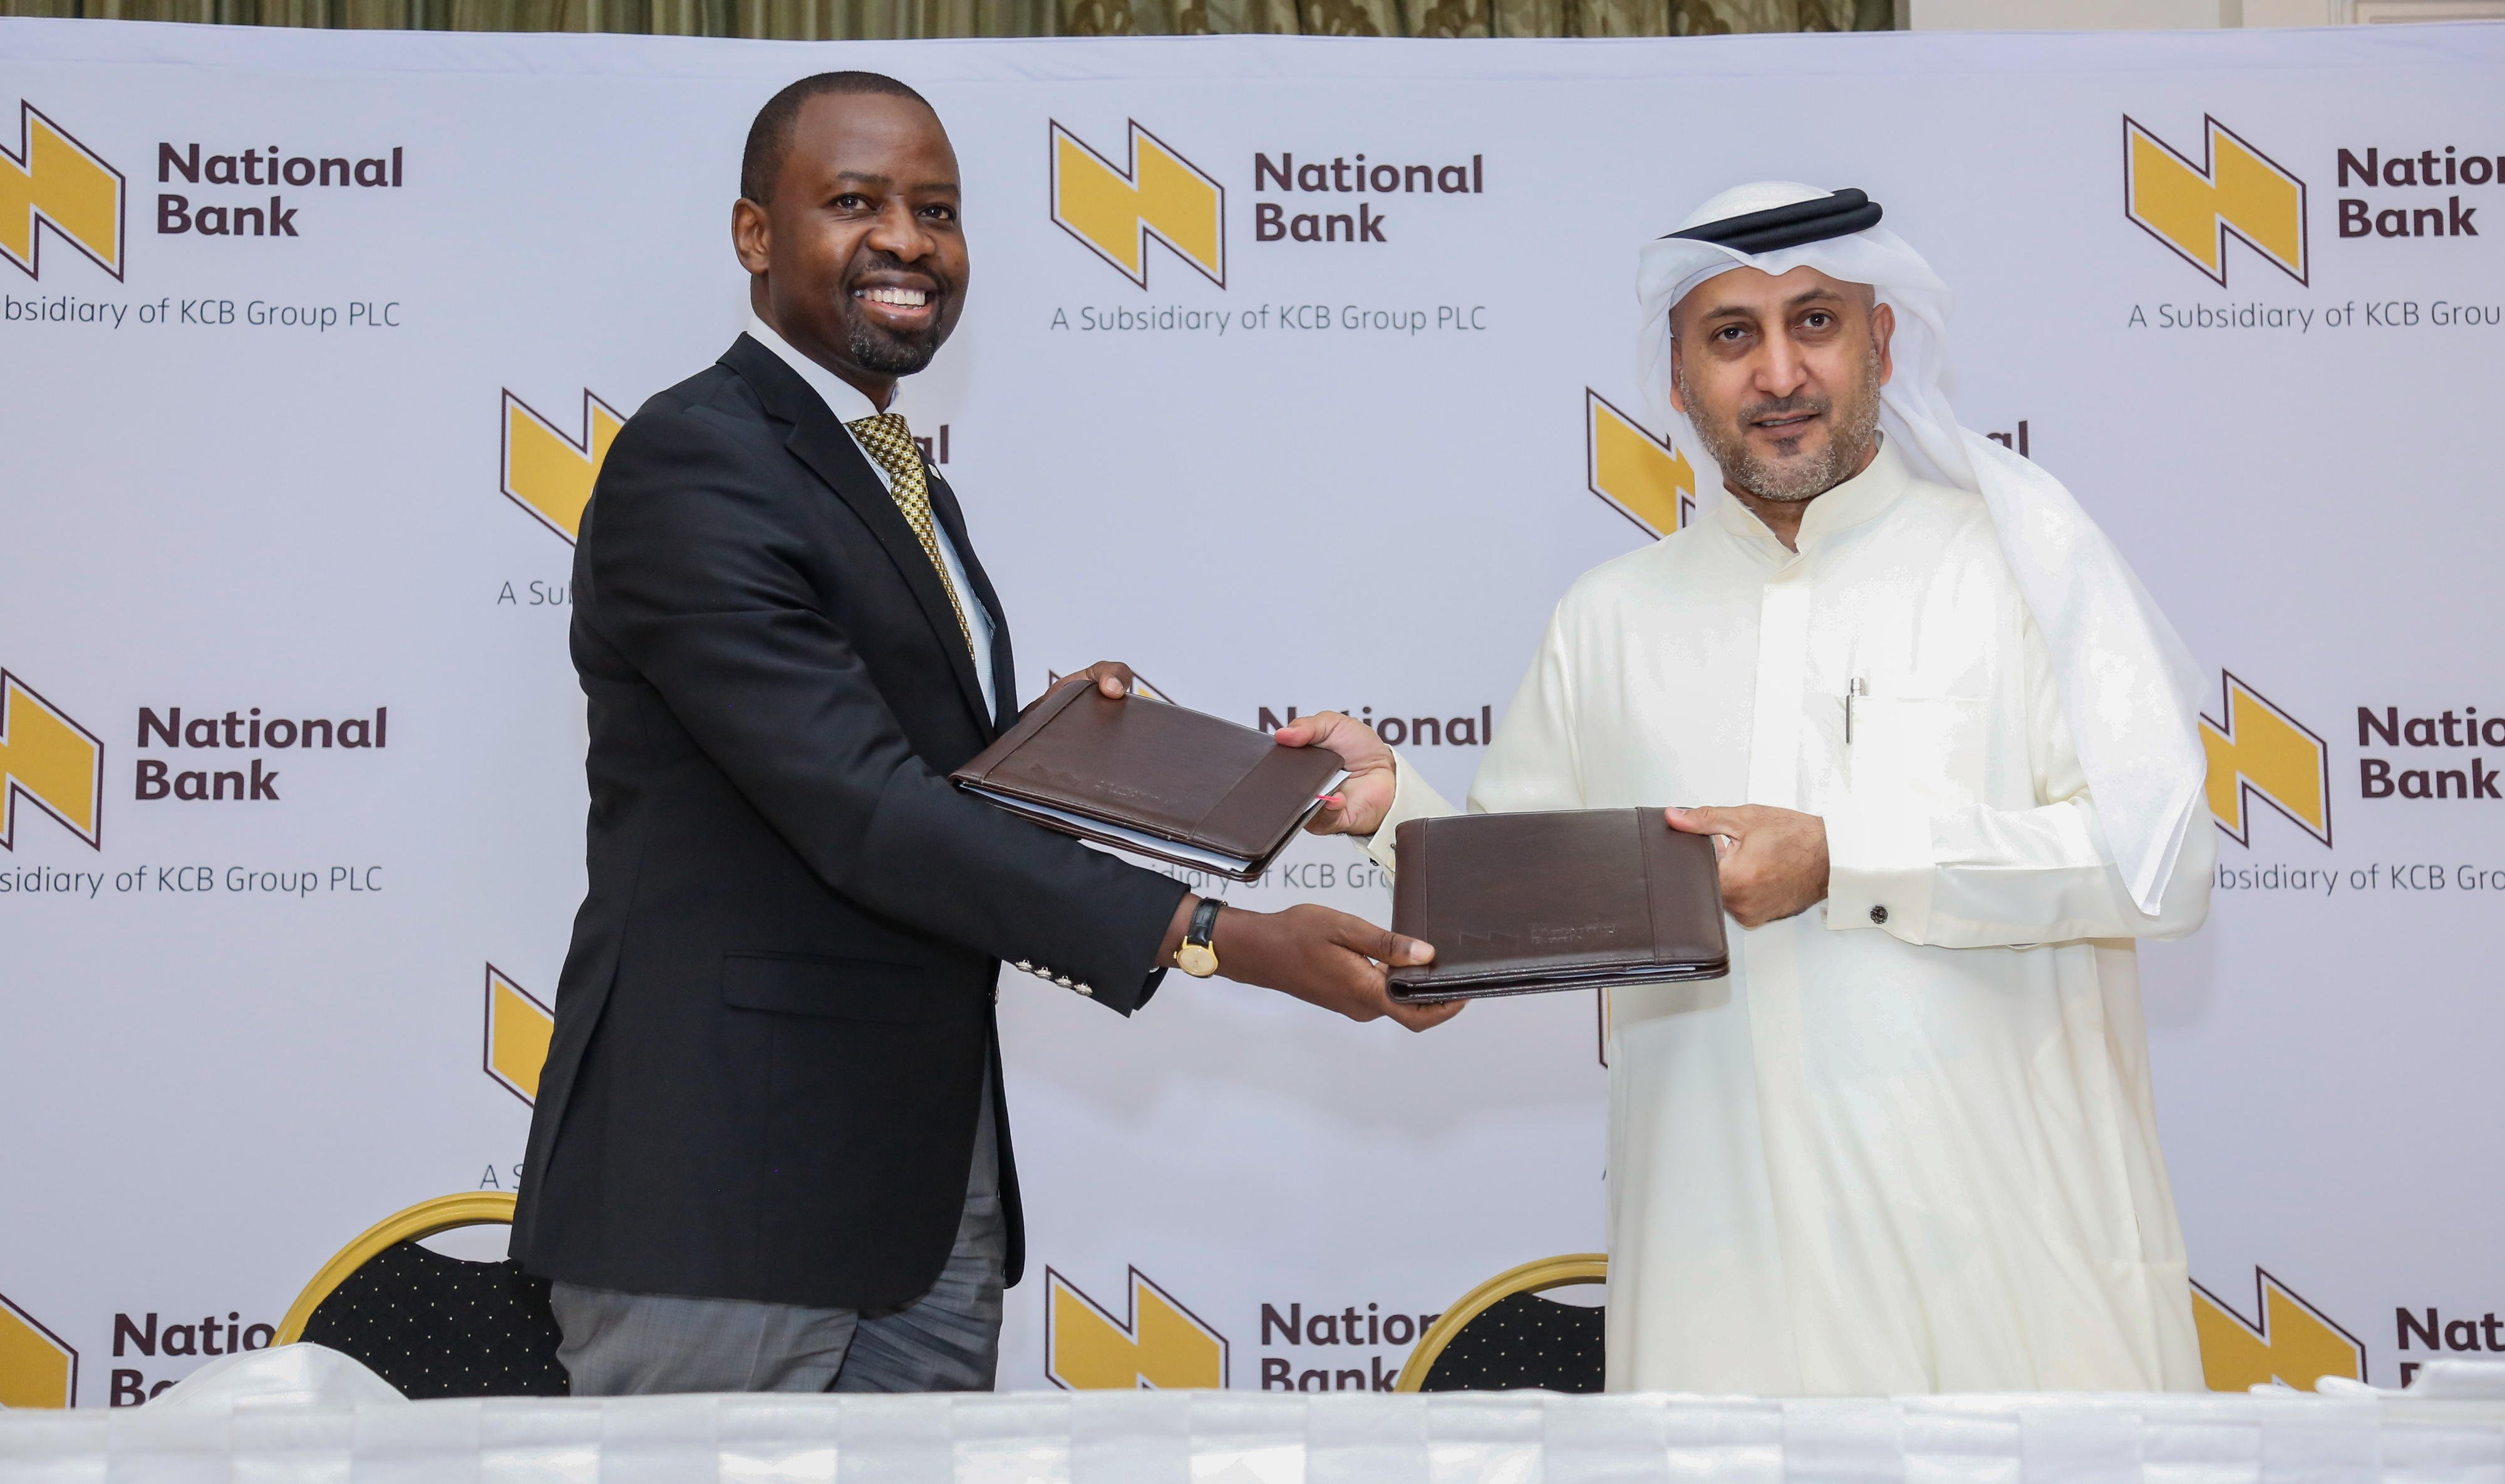 NBK, logistics firm DP World in deal to link SMEs to global market